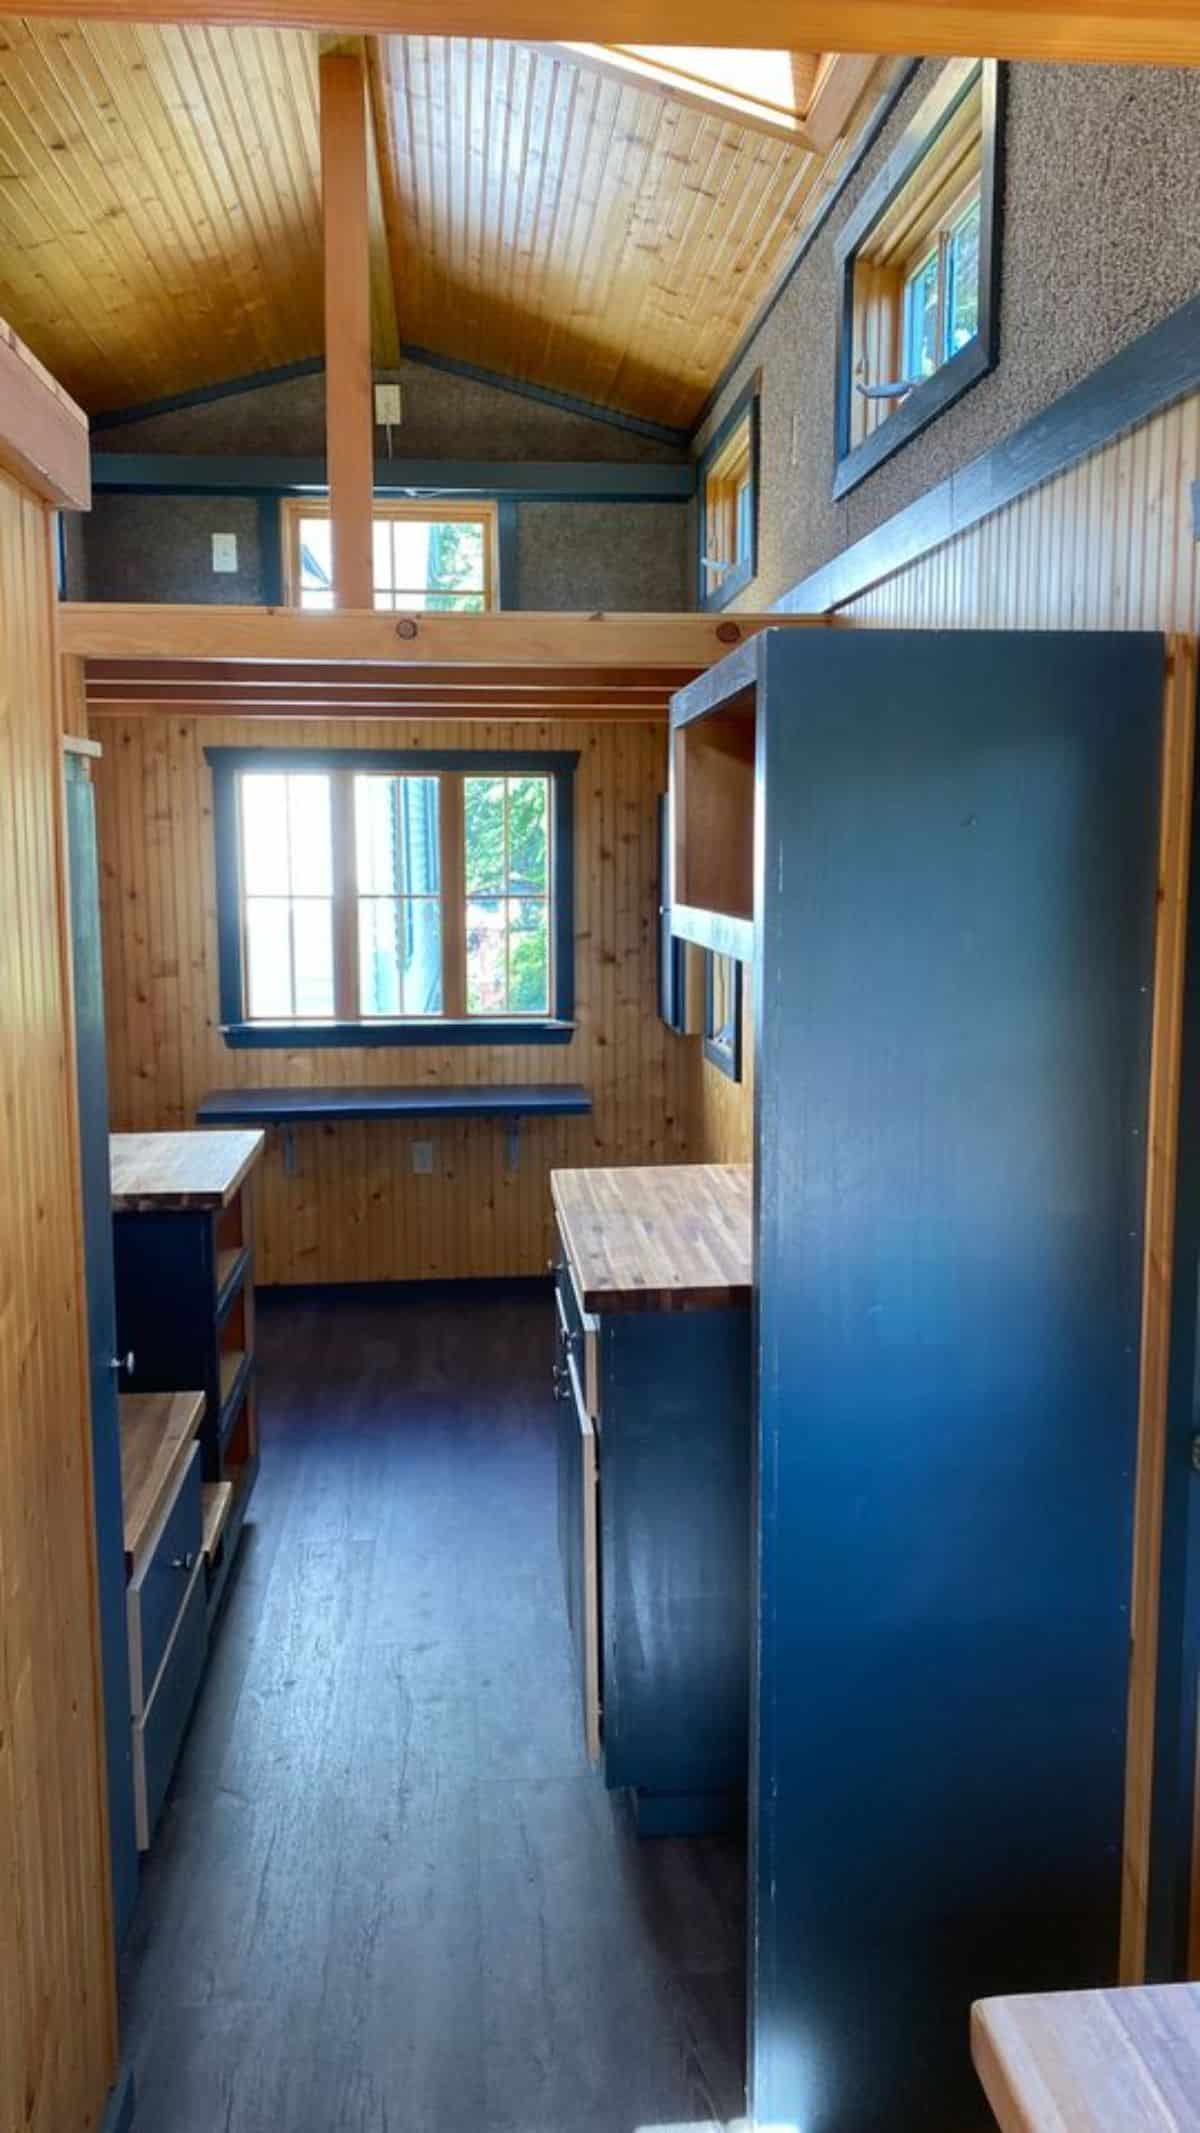 Living area of 20’ Cozy Tiny House is small but can accommodate L shaped couch